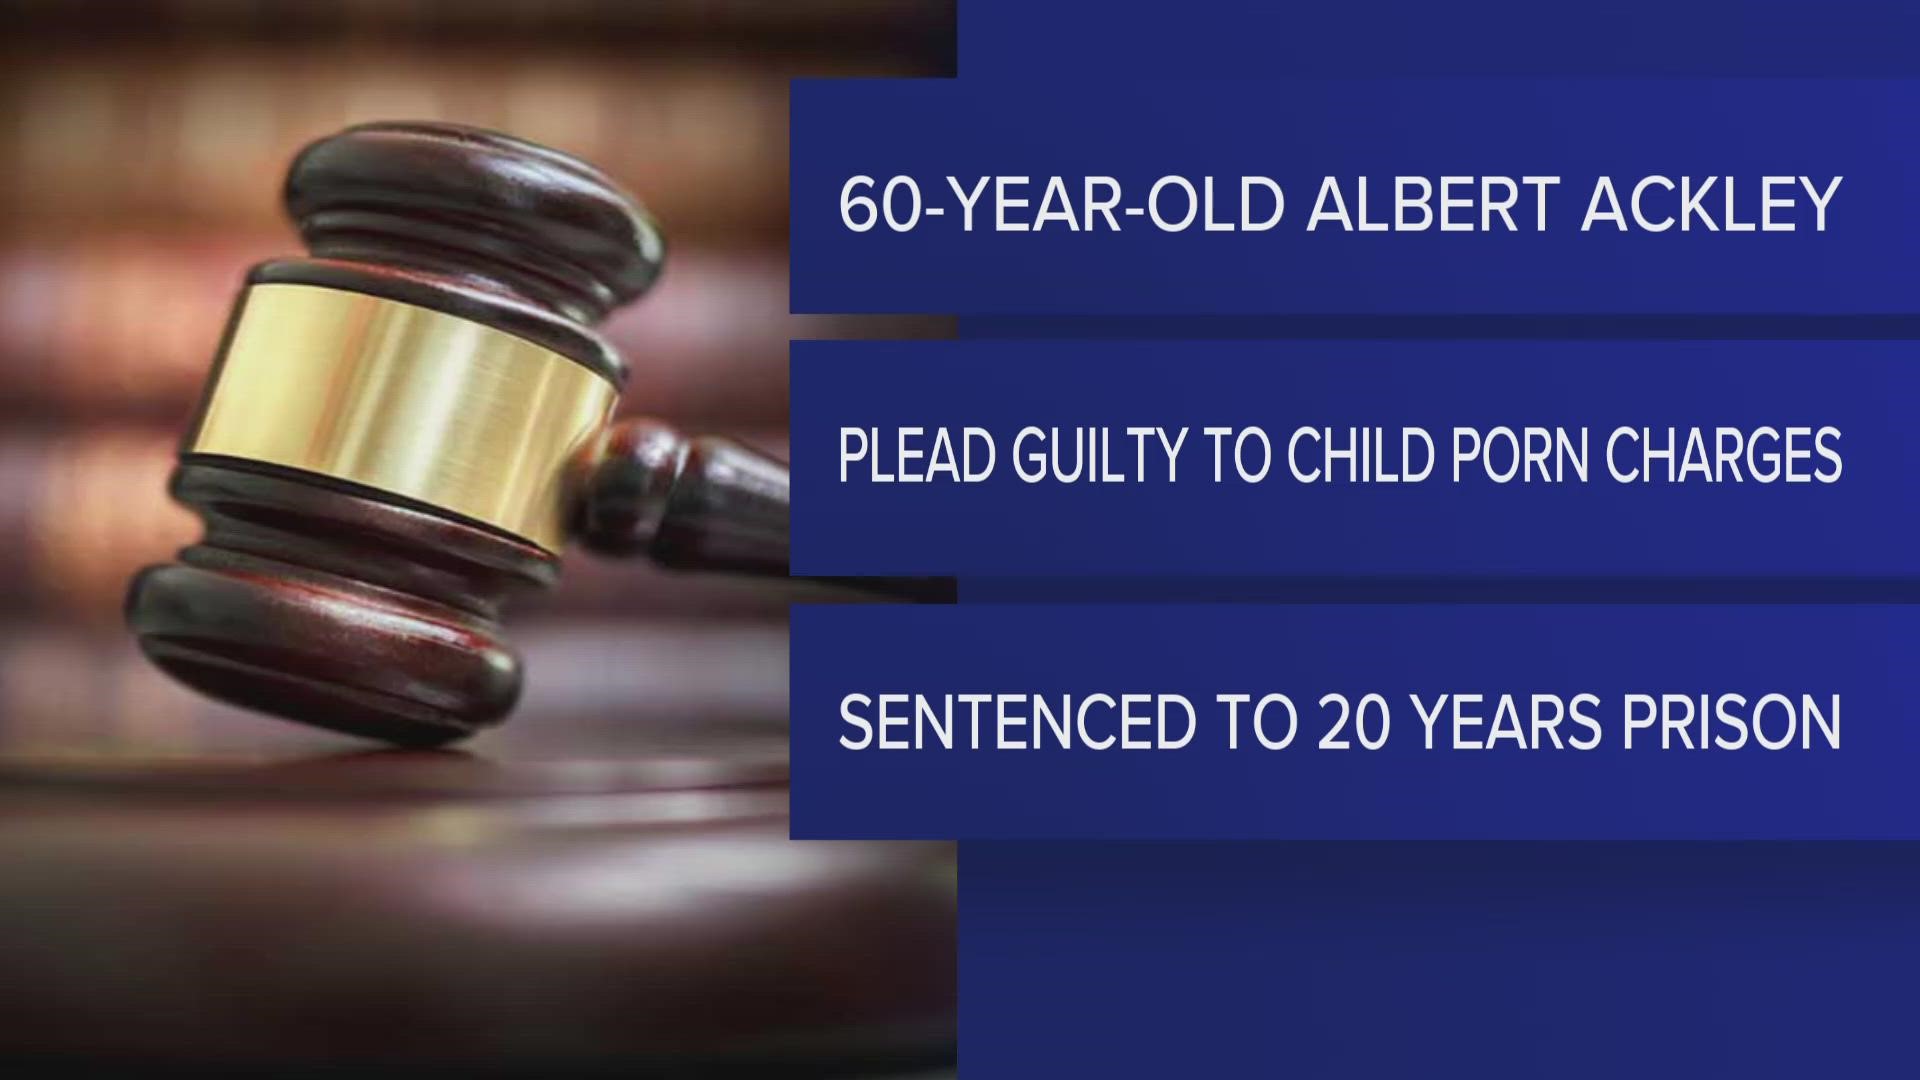 60-year-old Albert Ackley was arrested in March 2022 and pled guilty to the charges in August 2022.